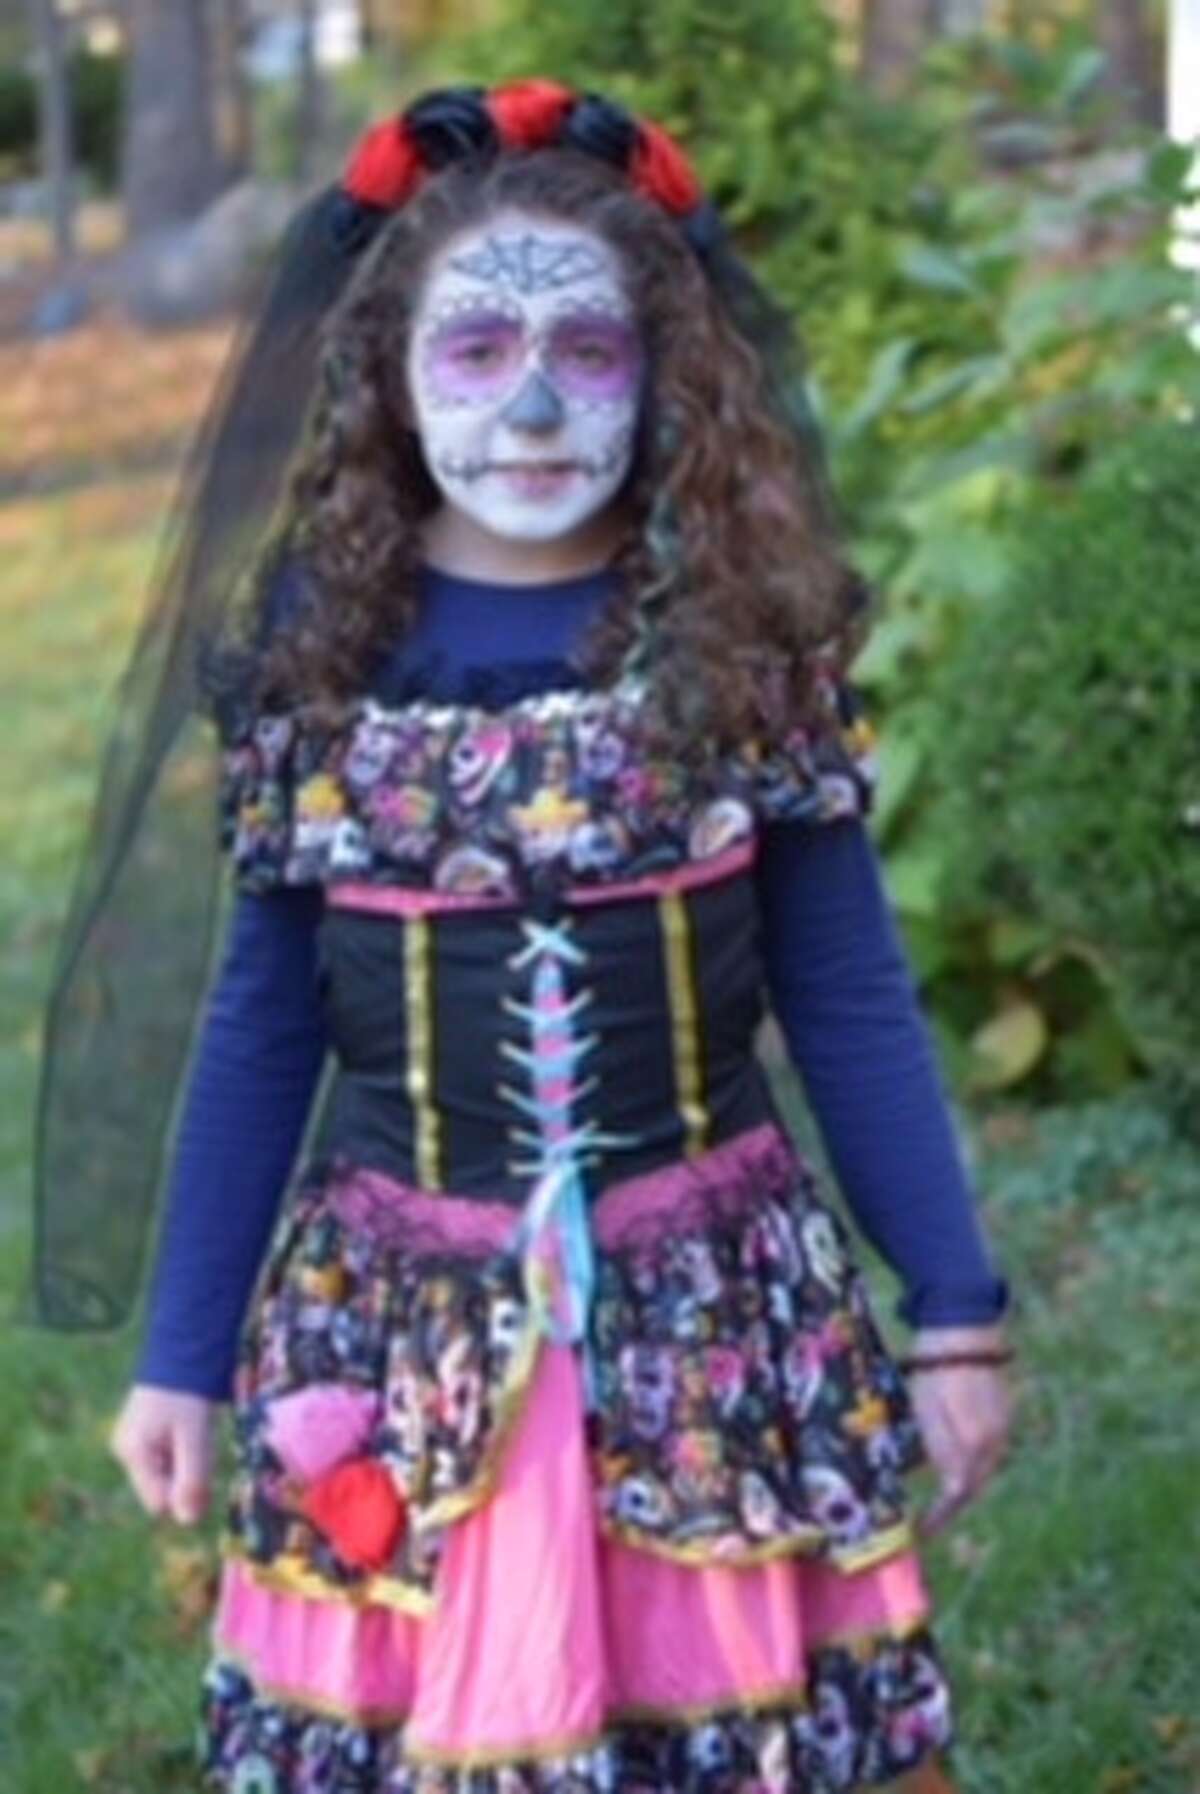 Sylvia Pinheiro, 11, of Brookfield dresses up for Halloween. She even did the makeup herself!